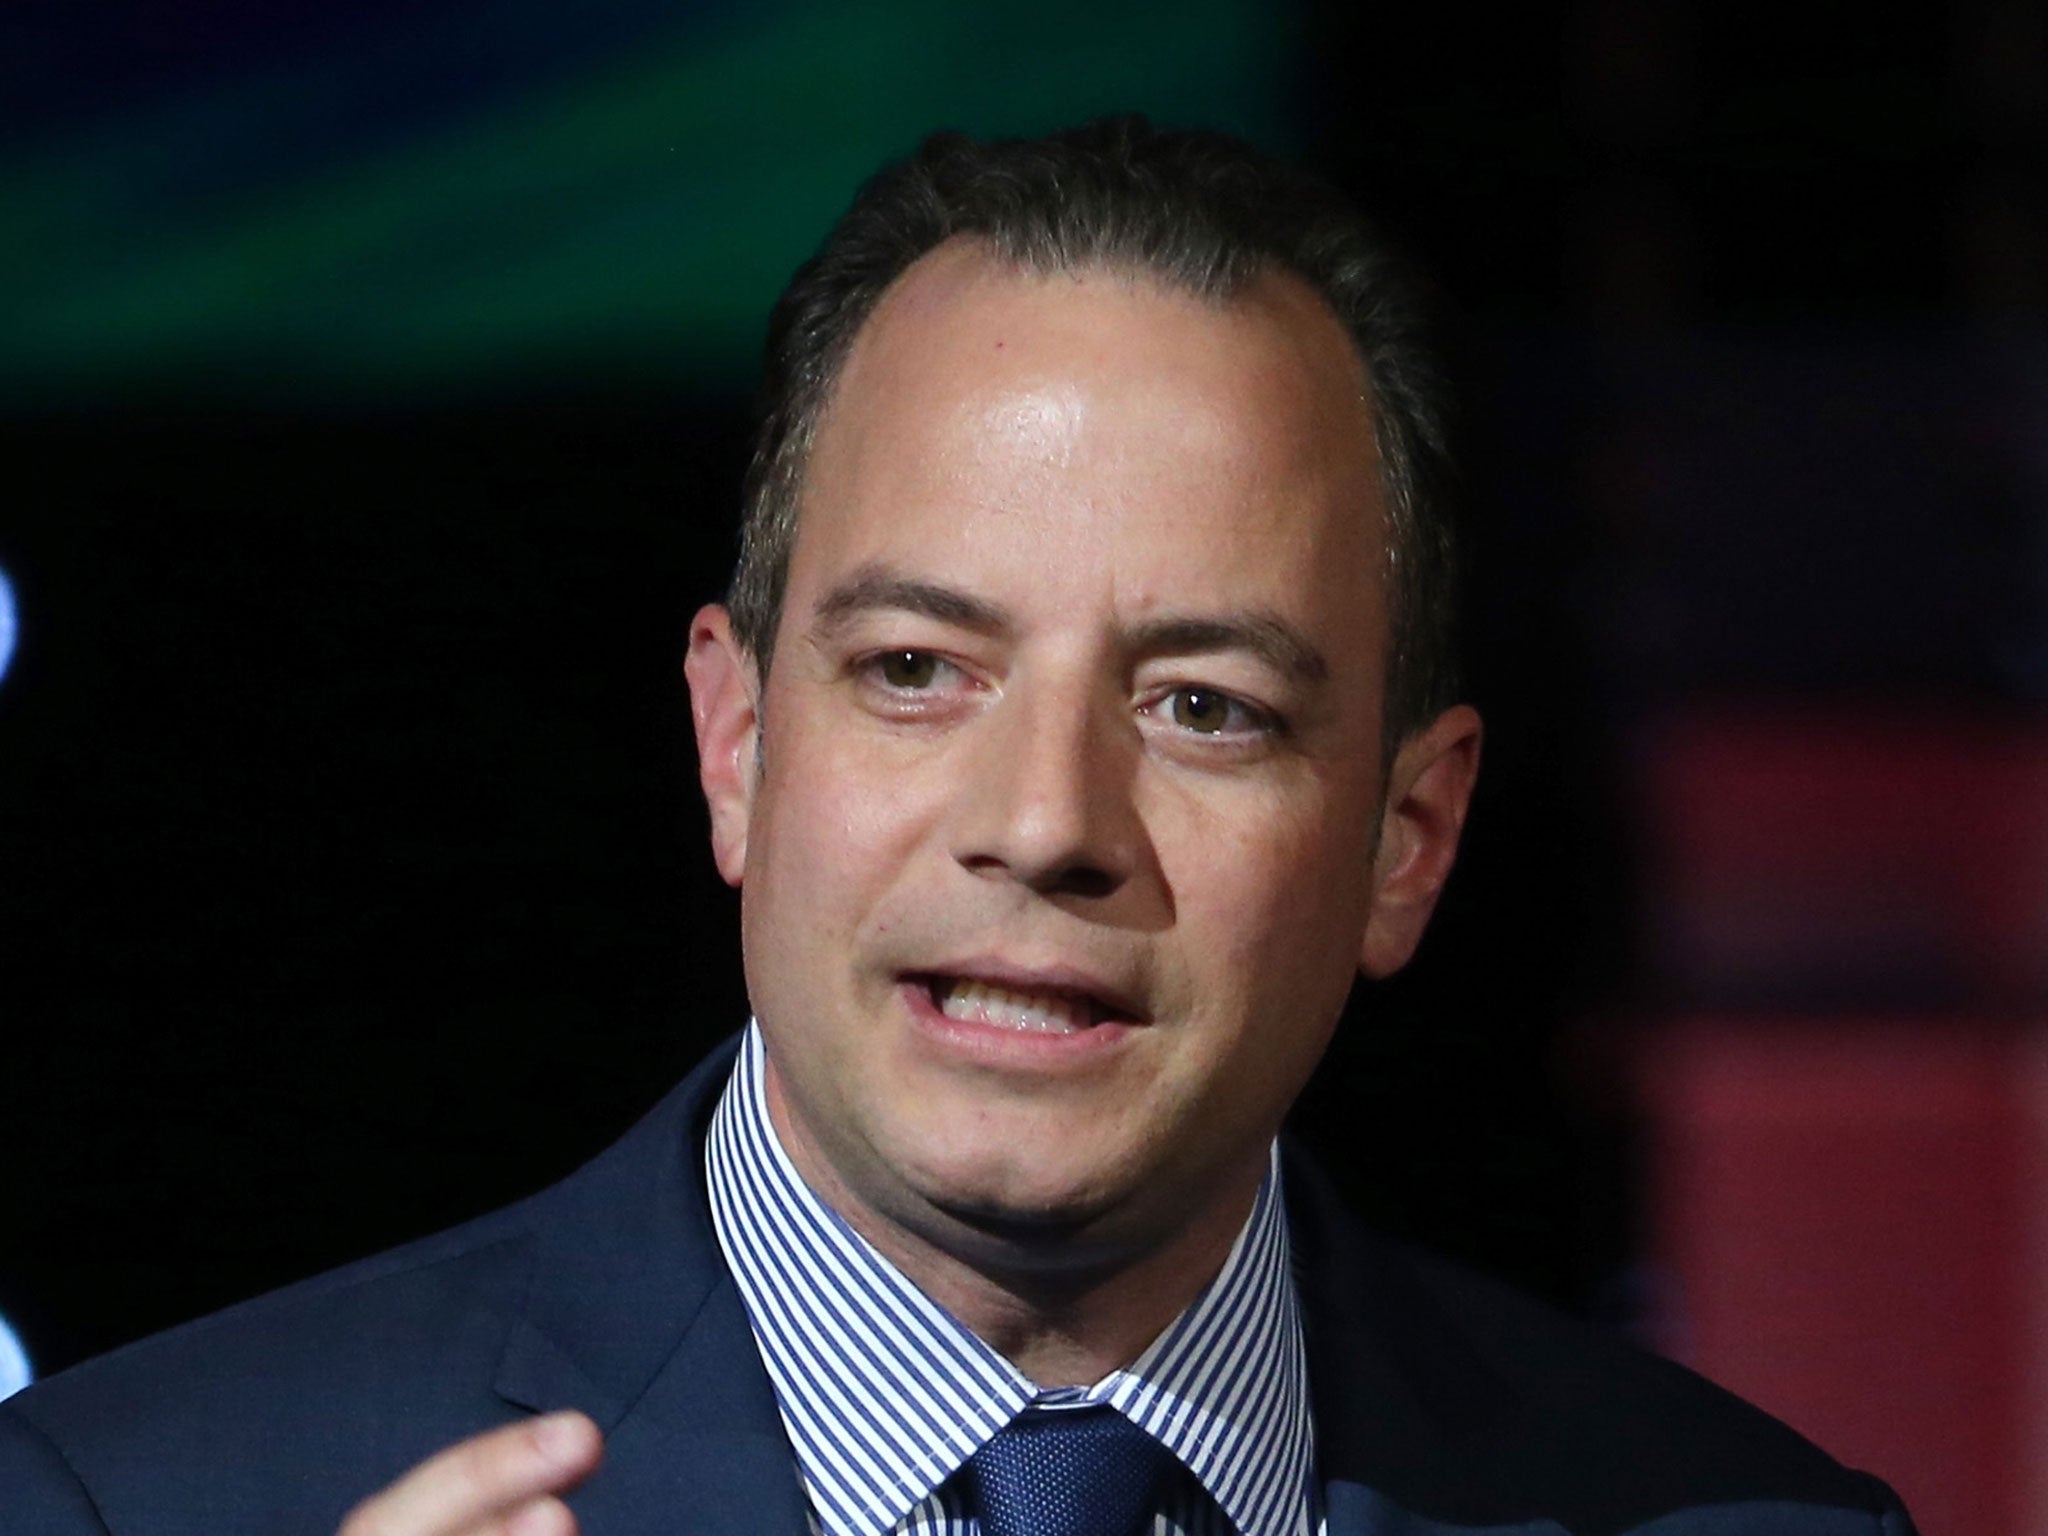 Mr Priebus said the one China policy would not be revisited - 'right now'